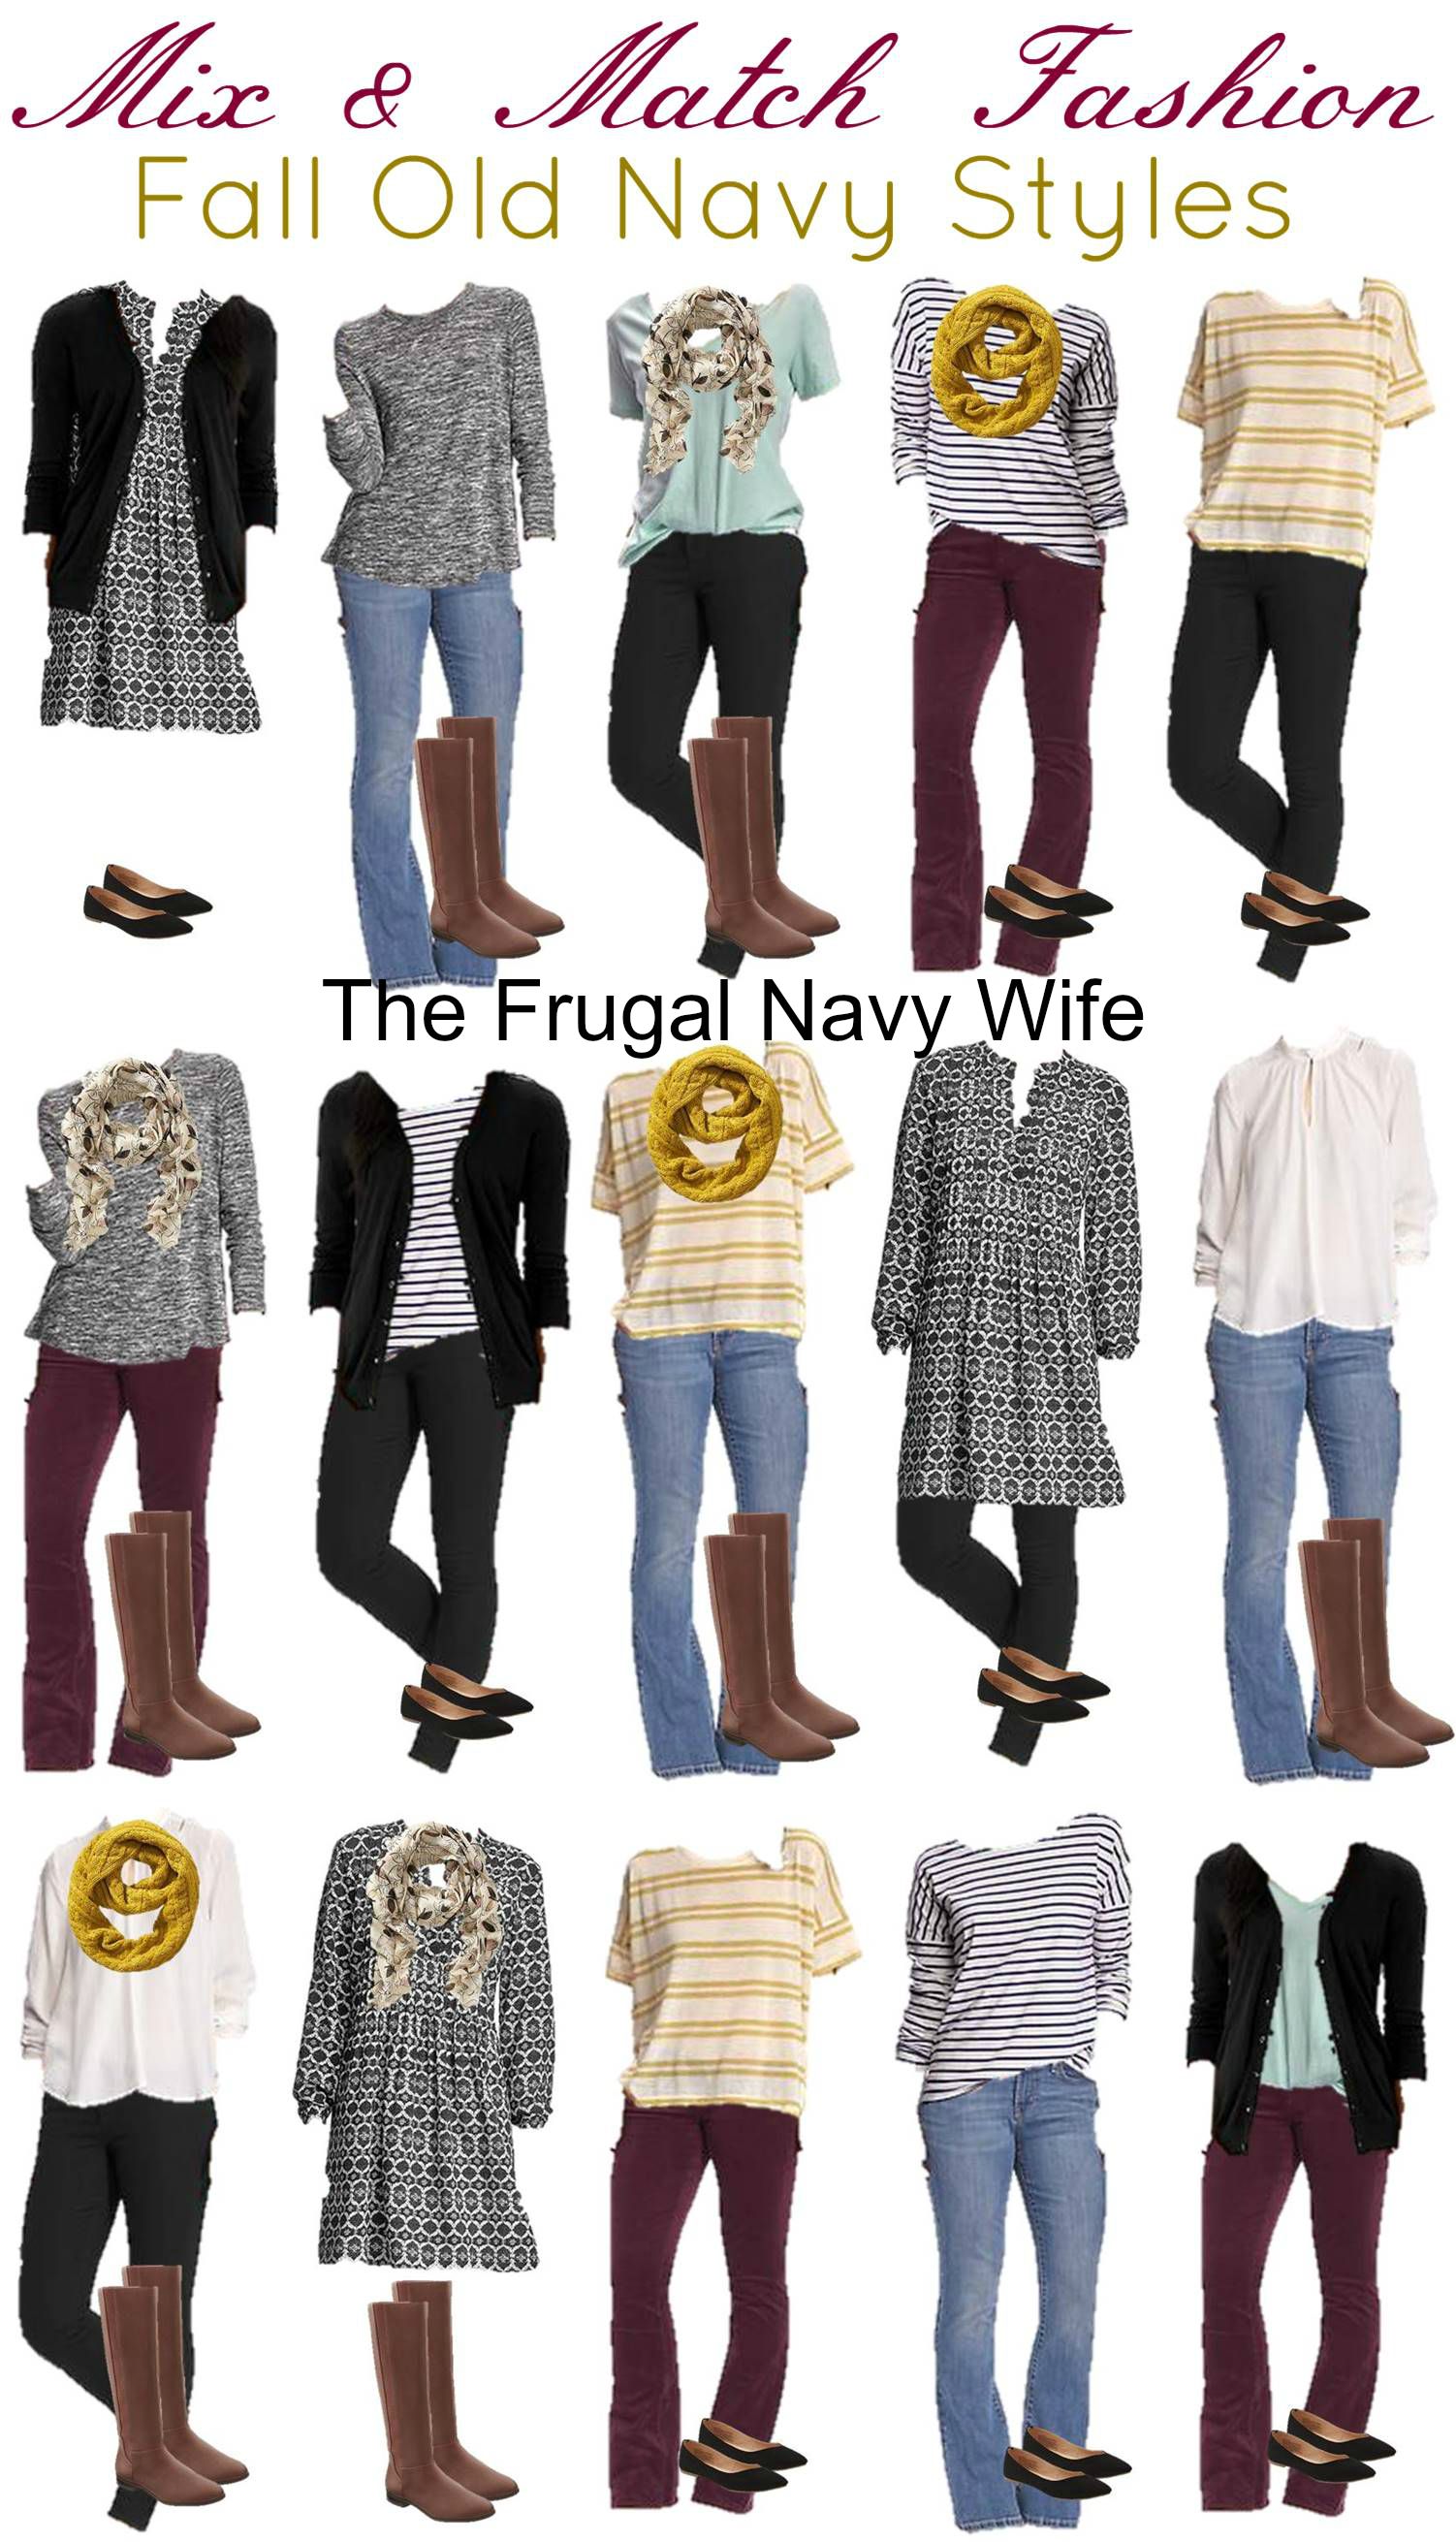 Old Navy Mix and Match Fall Outfits